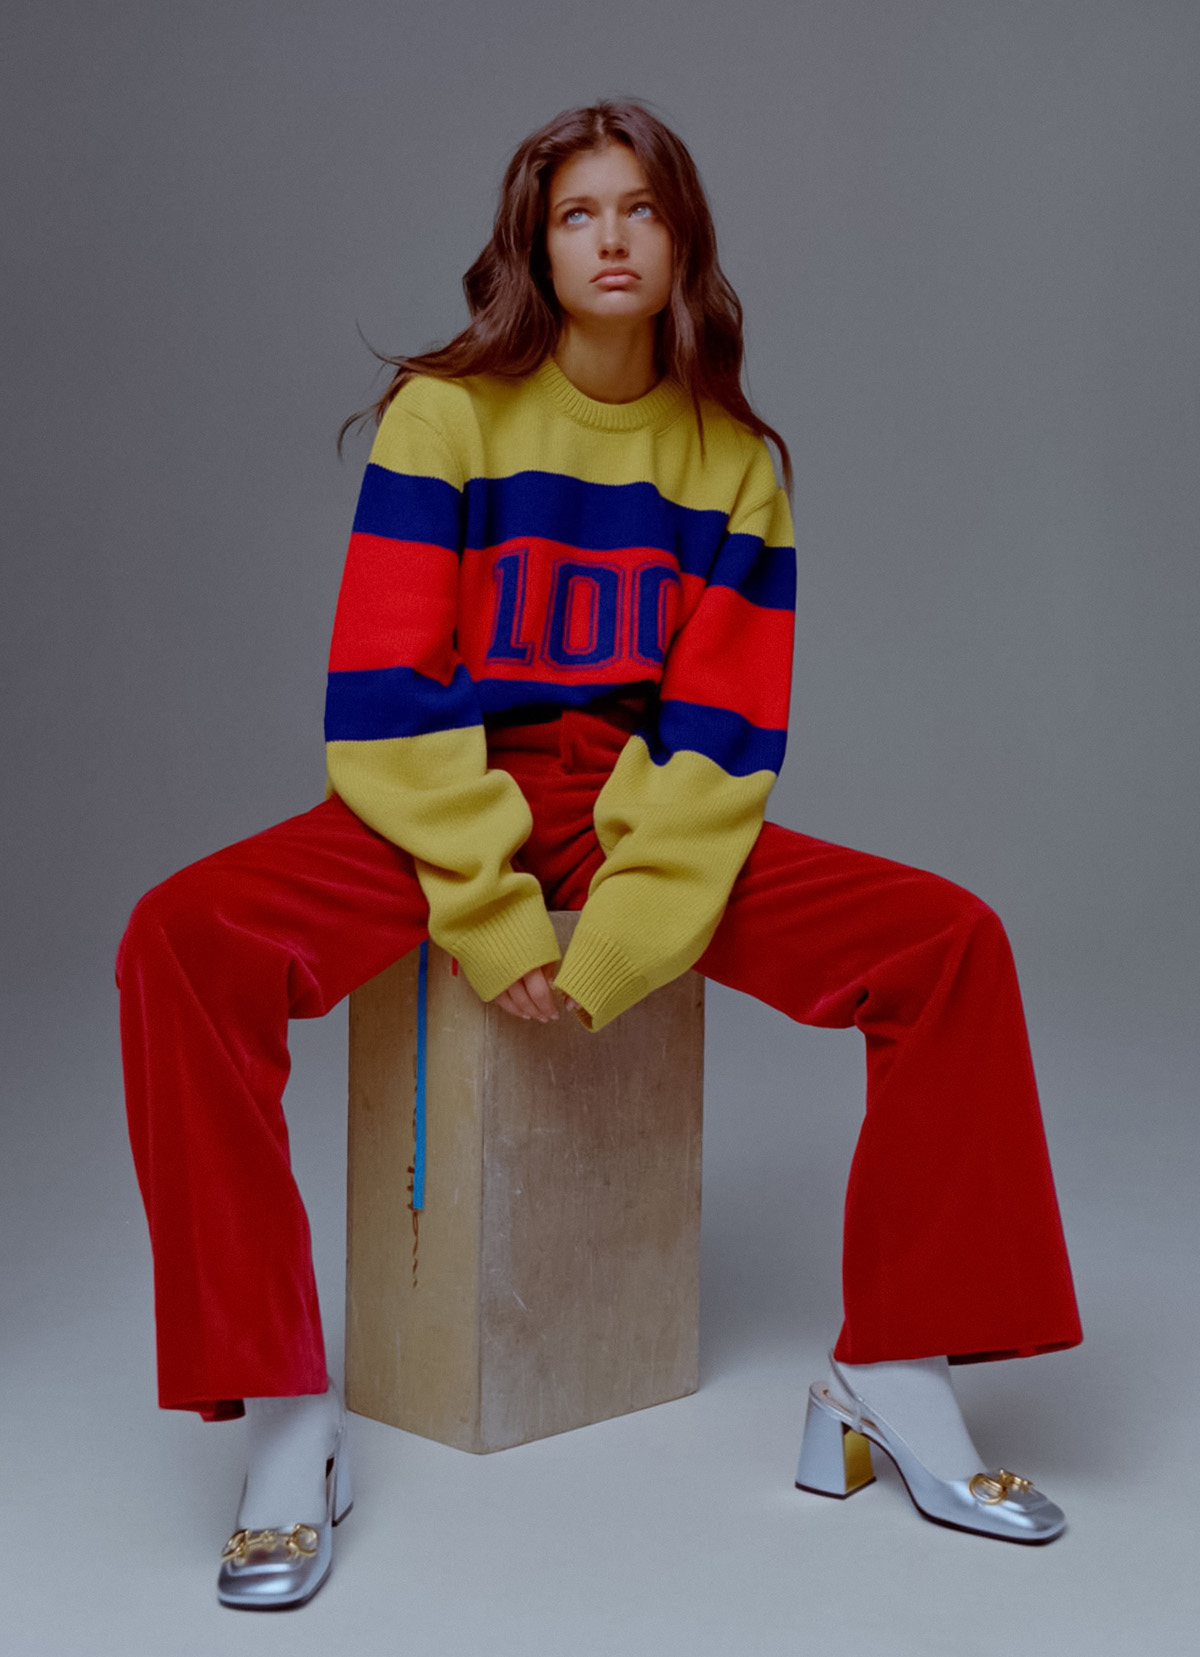 Elise Zecevic by Jake Terrey for Marie Claire Australia November 2021